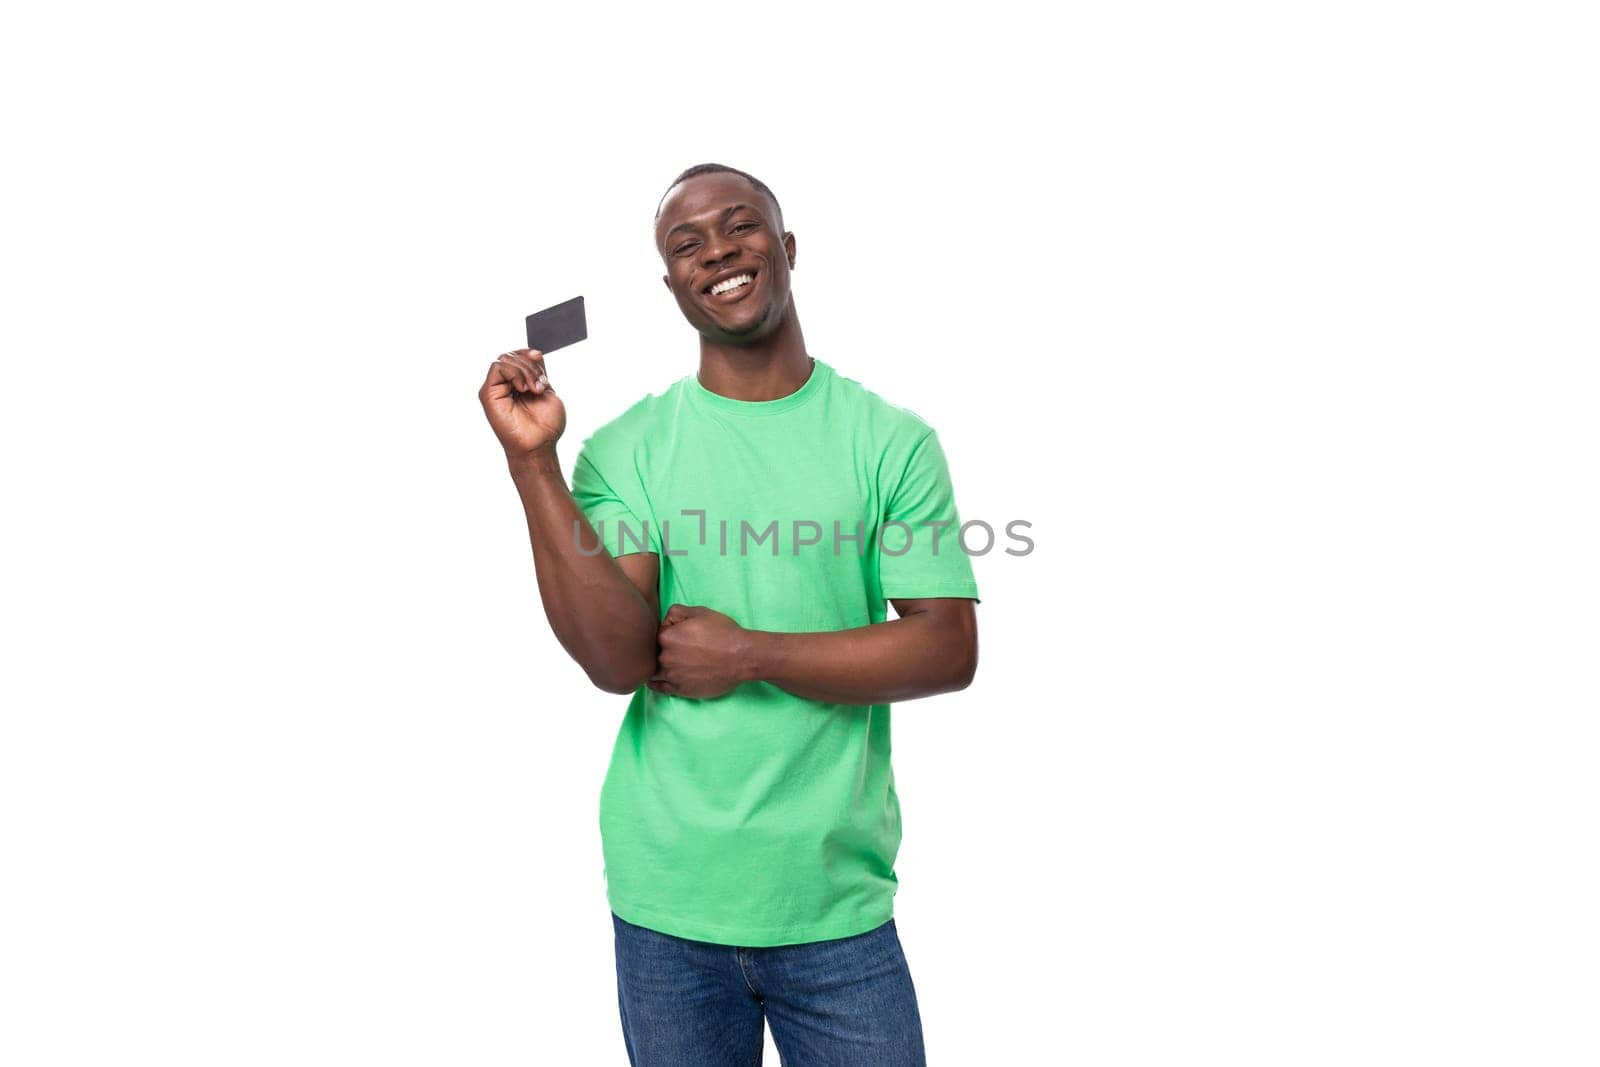 A 30-year-old American man dressed in a light green basic T-shirt holds a plastic credit card.